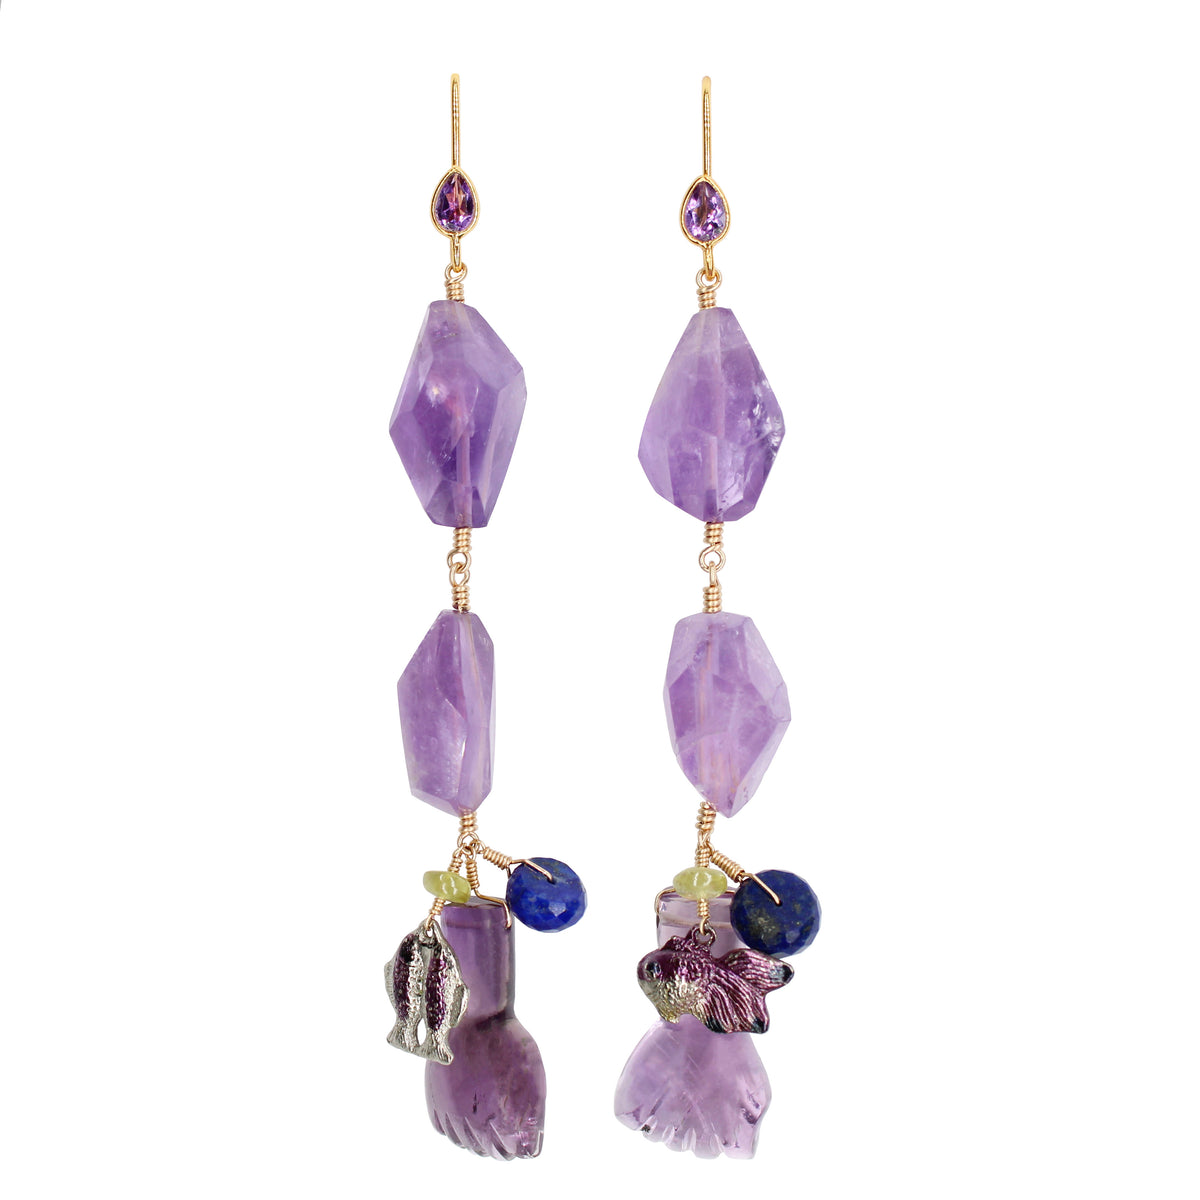 Amethyst Dangle Earring with Various Gemstones & Antique Charms.